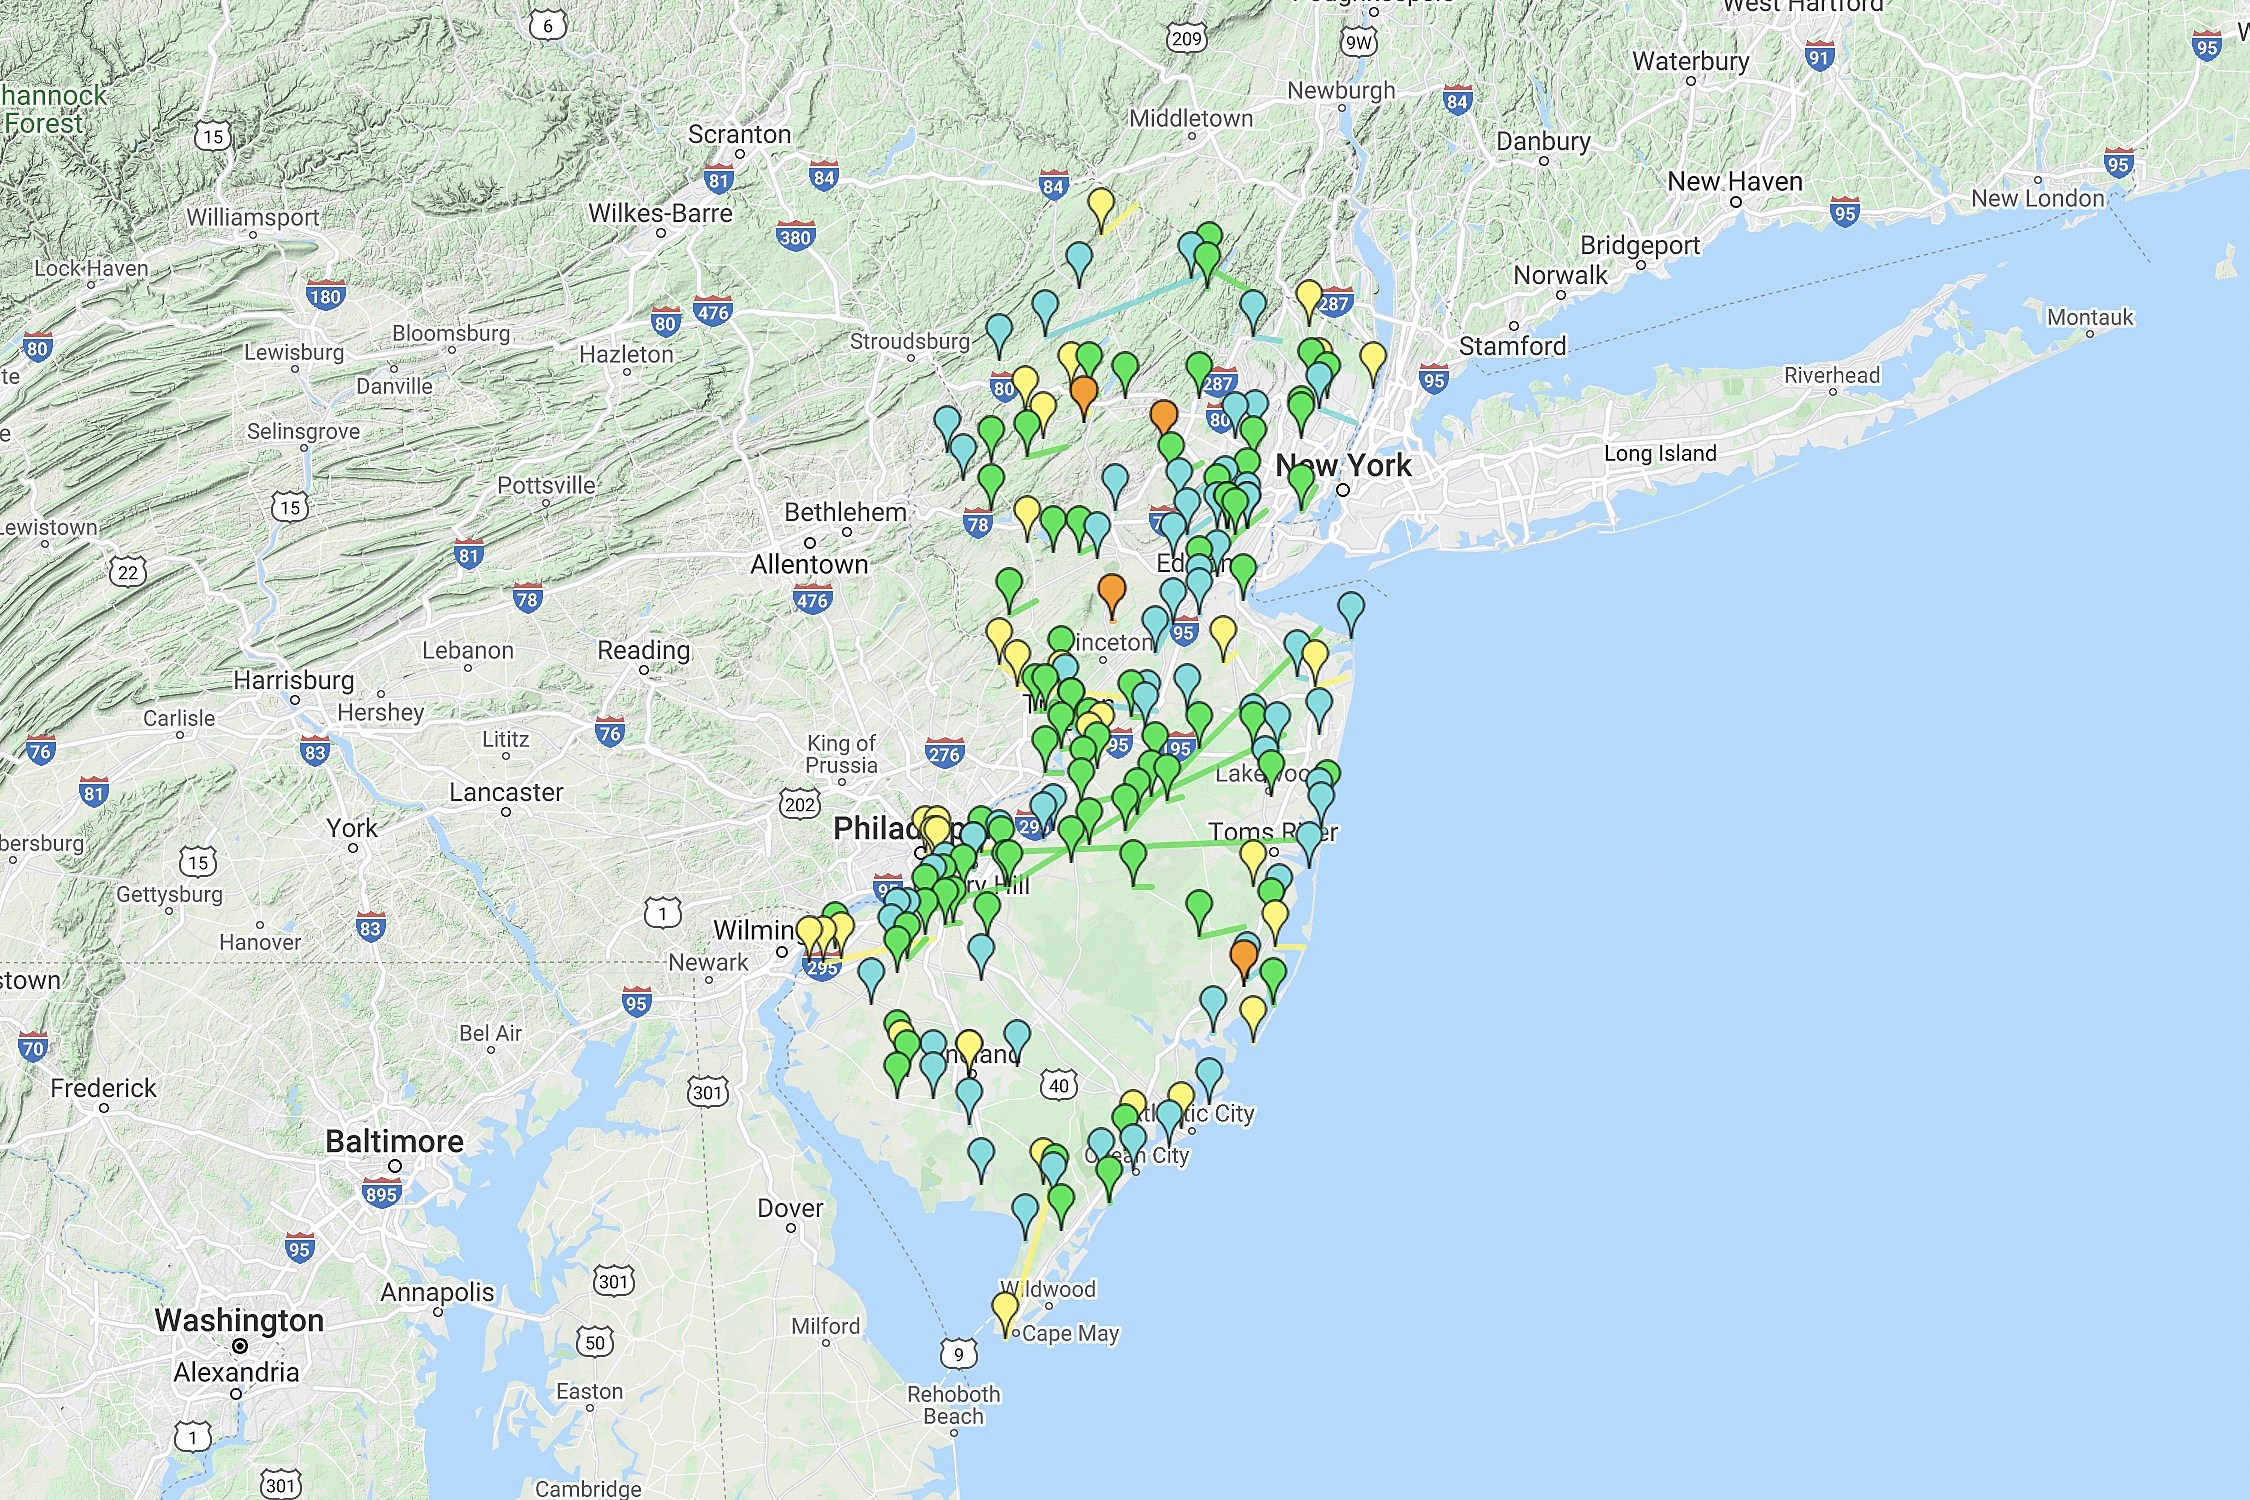 Has a tornado ever hit your NJ town?